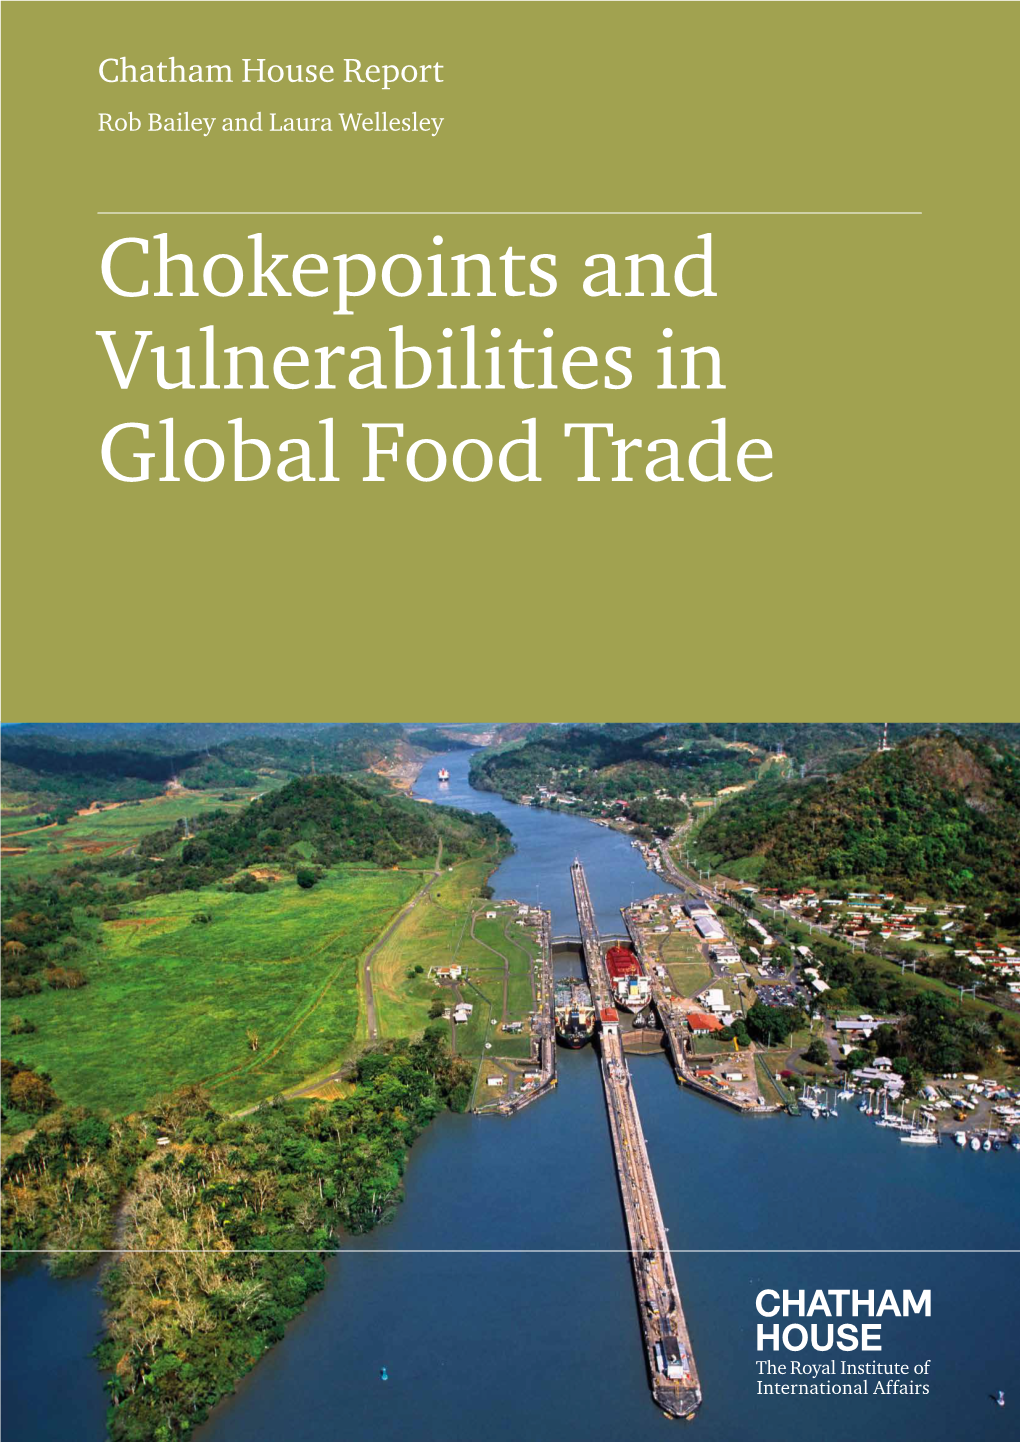 Chokepoints and Vulnerabilities in Global Food Trade Chatham House Report Rob Bailey and Laura Wellesley